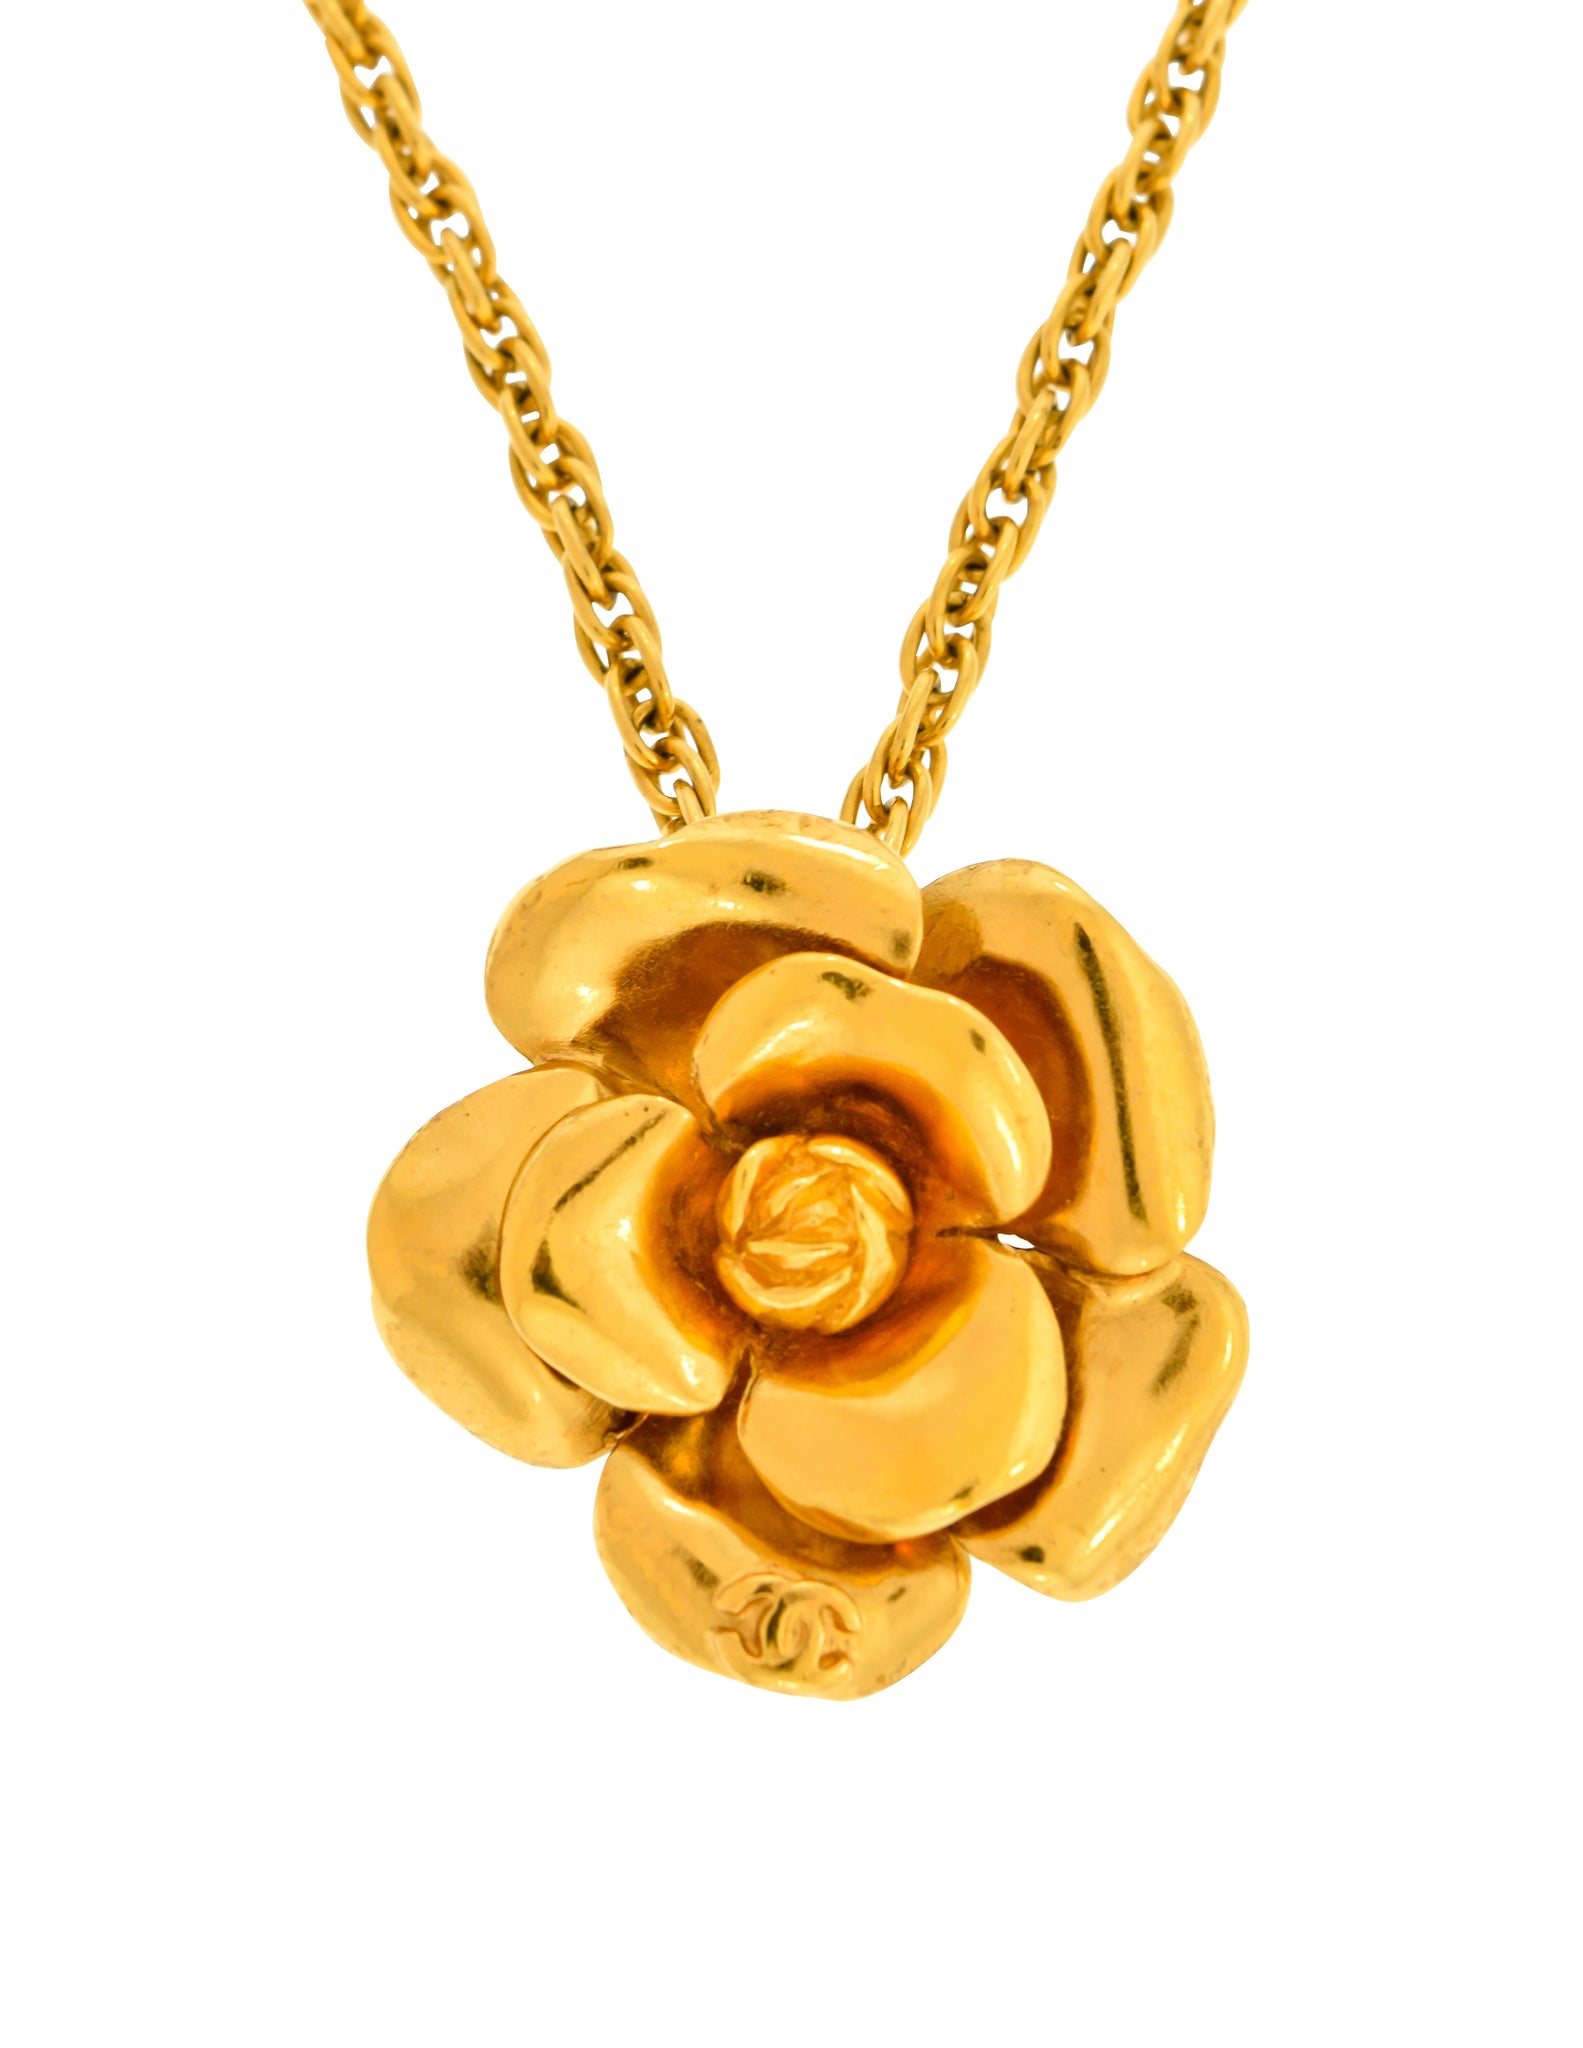 Chanel Vintage SS 1999 Gold Plated Camellia Pendant Necklace